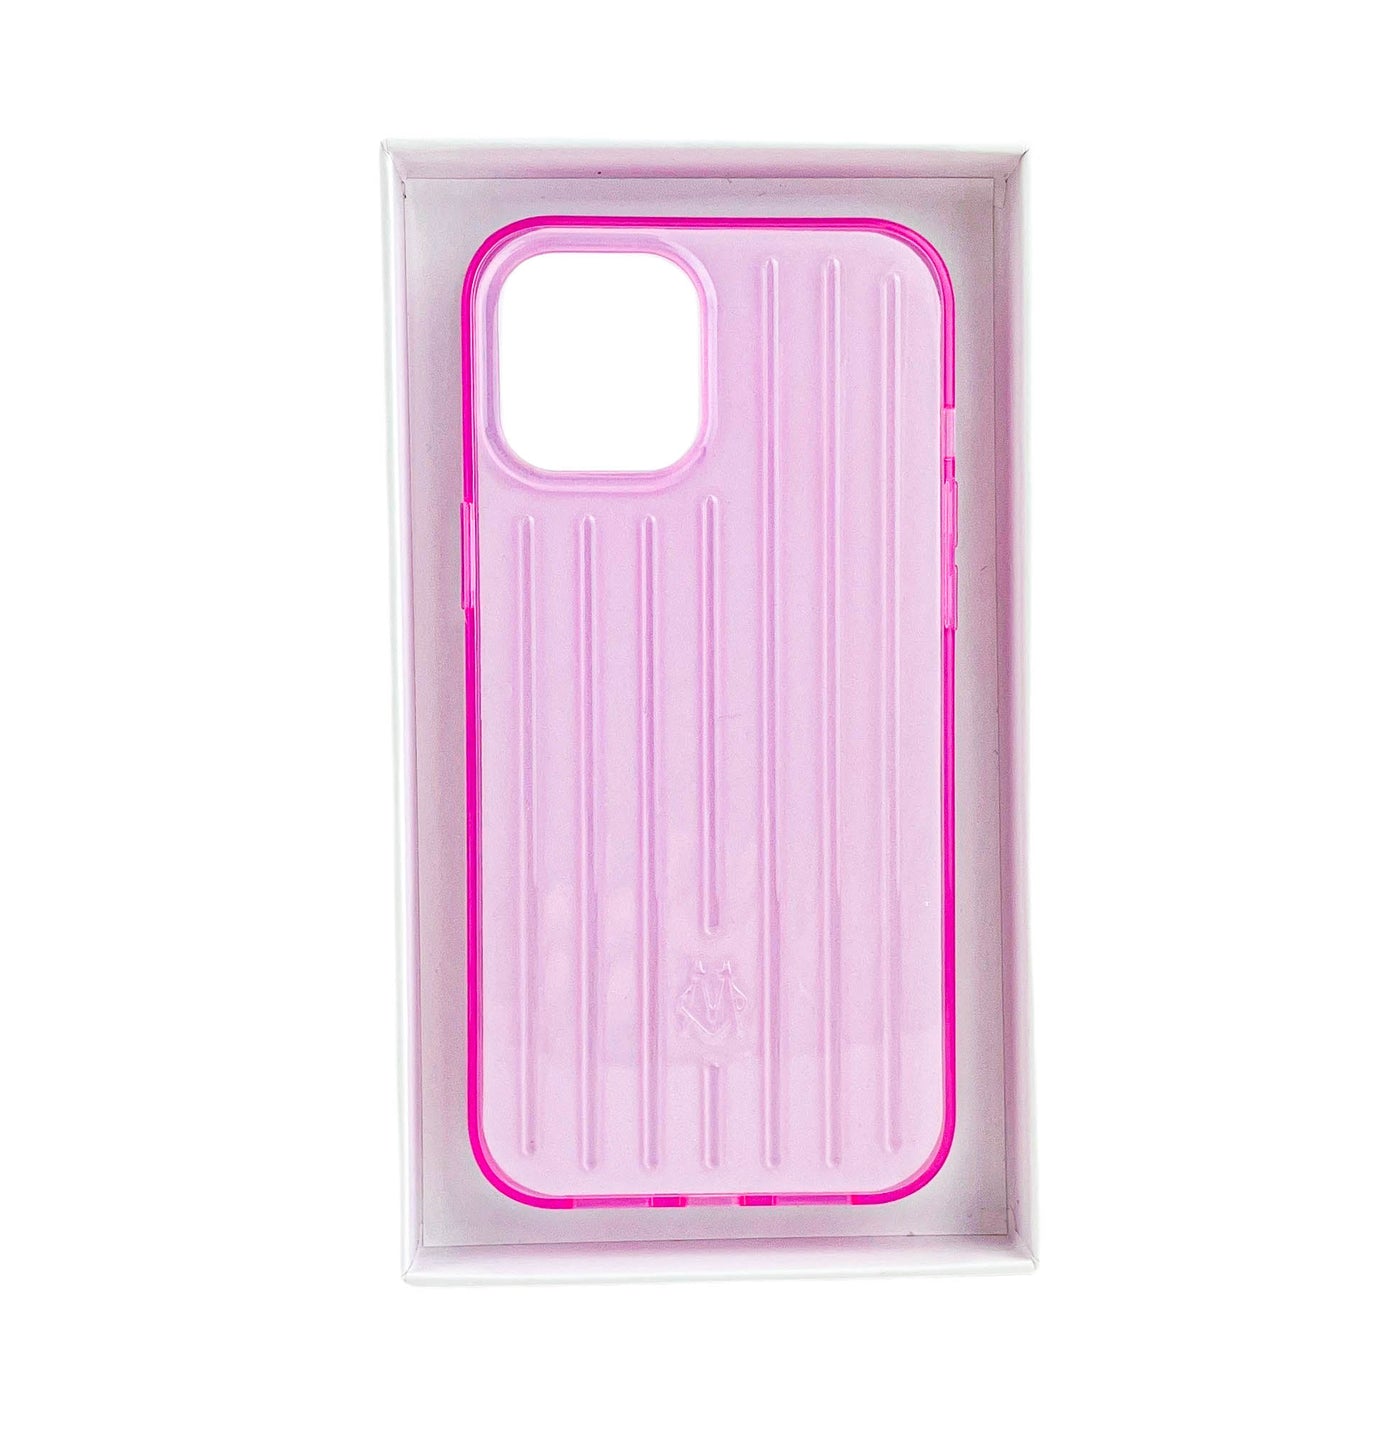 RIMOWA iPhone 12/12 Pro Phone Case in Fluorescent Pink - Discounts on RIMOWA at UAL